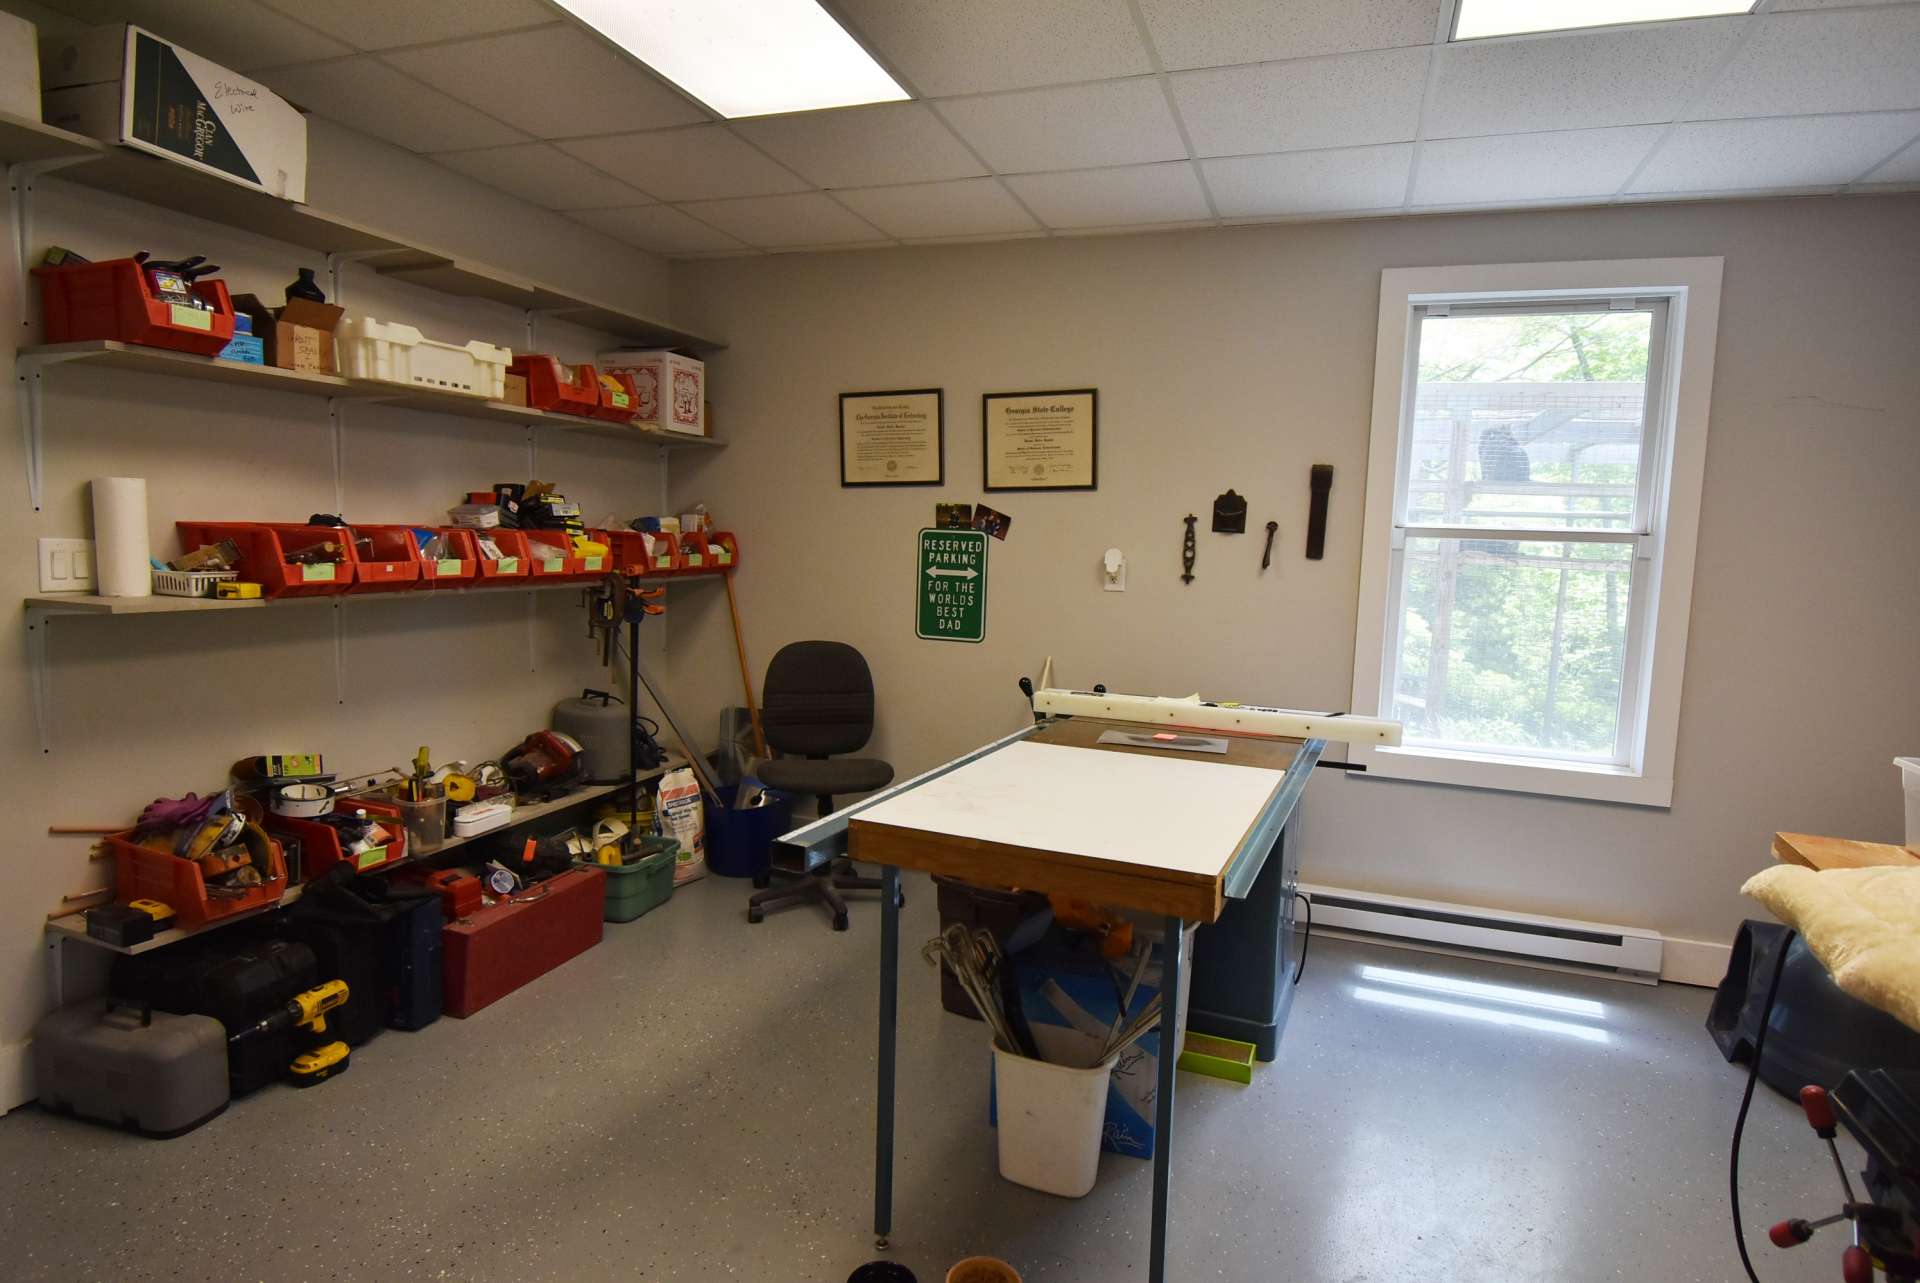 To complete the lower level, this workshop area is sure to please the handyman in the family.